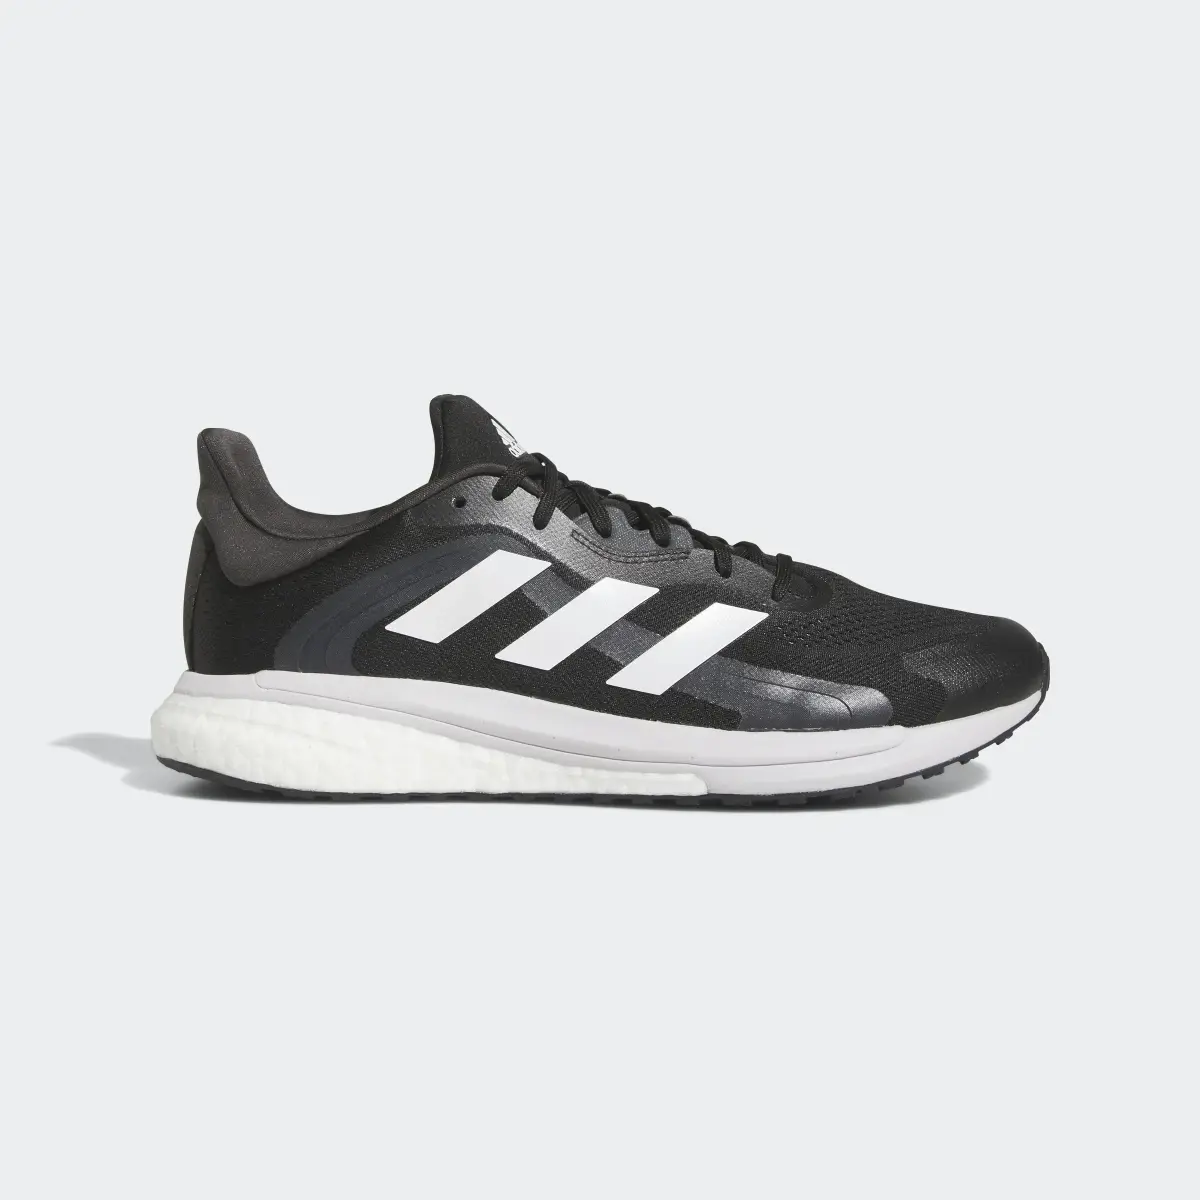 Adidas Chaussure SolarGlide 4 ST. 2